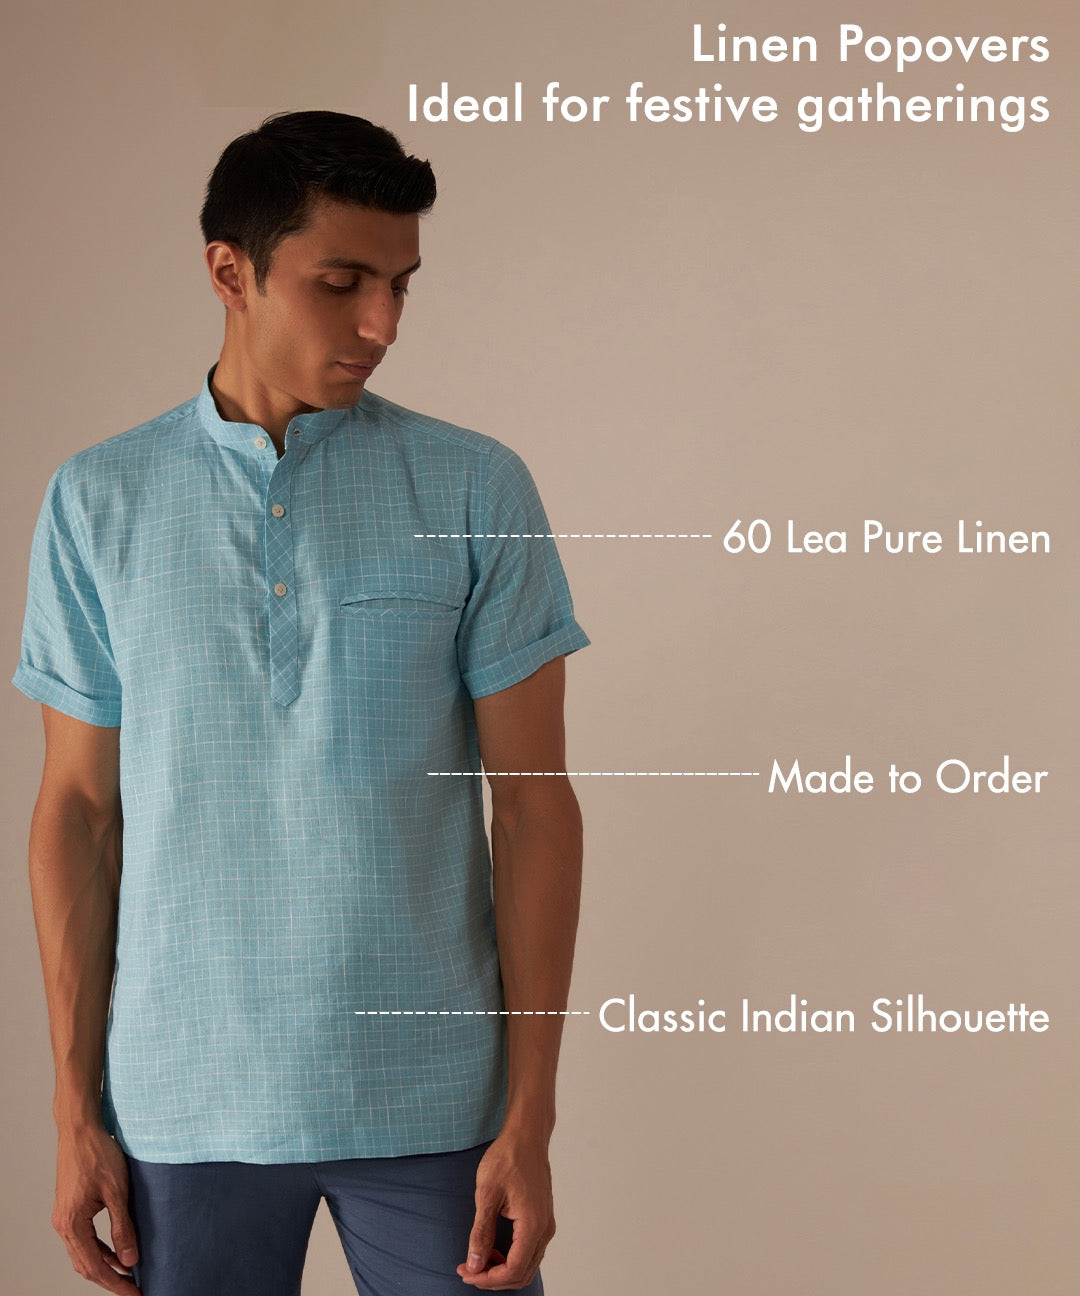 Teal Popover Shirt